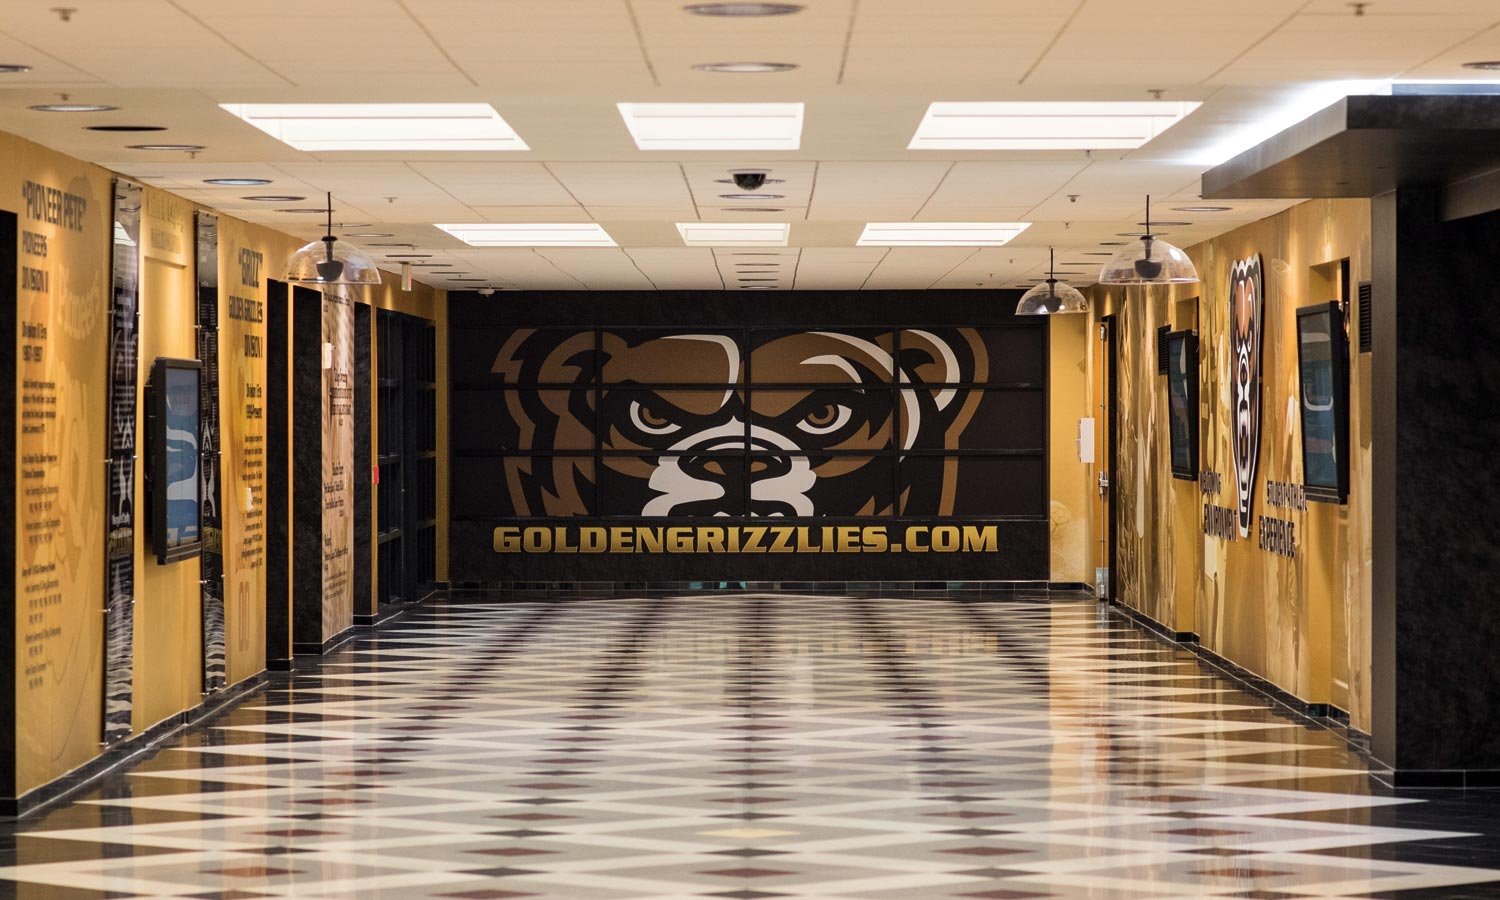 Featured image for Oh-Rena! TVs, graphics greet Grizzly fans